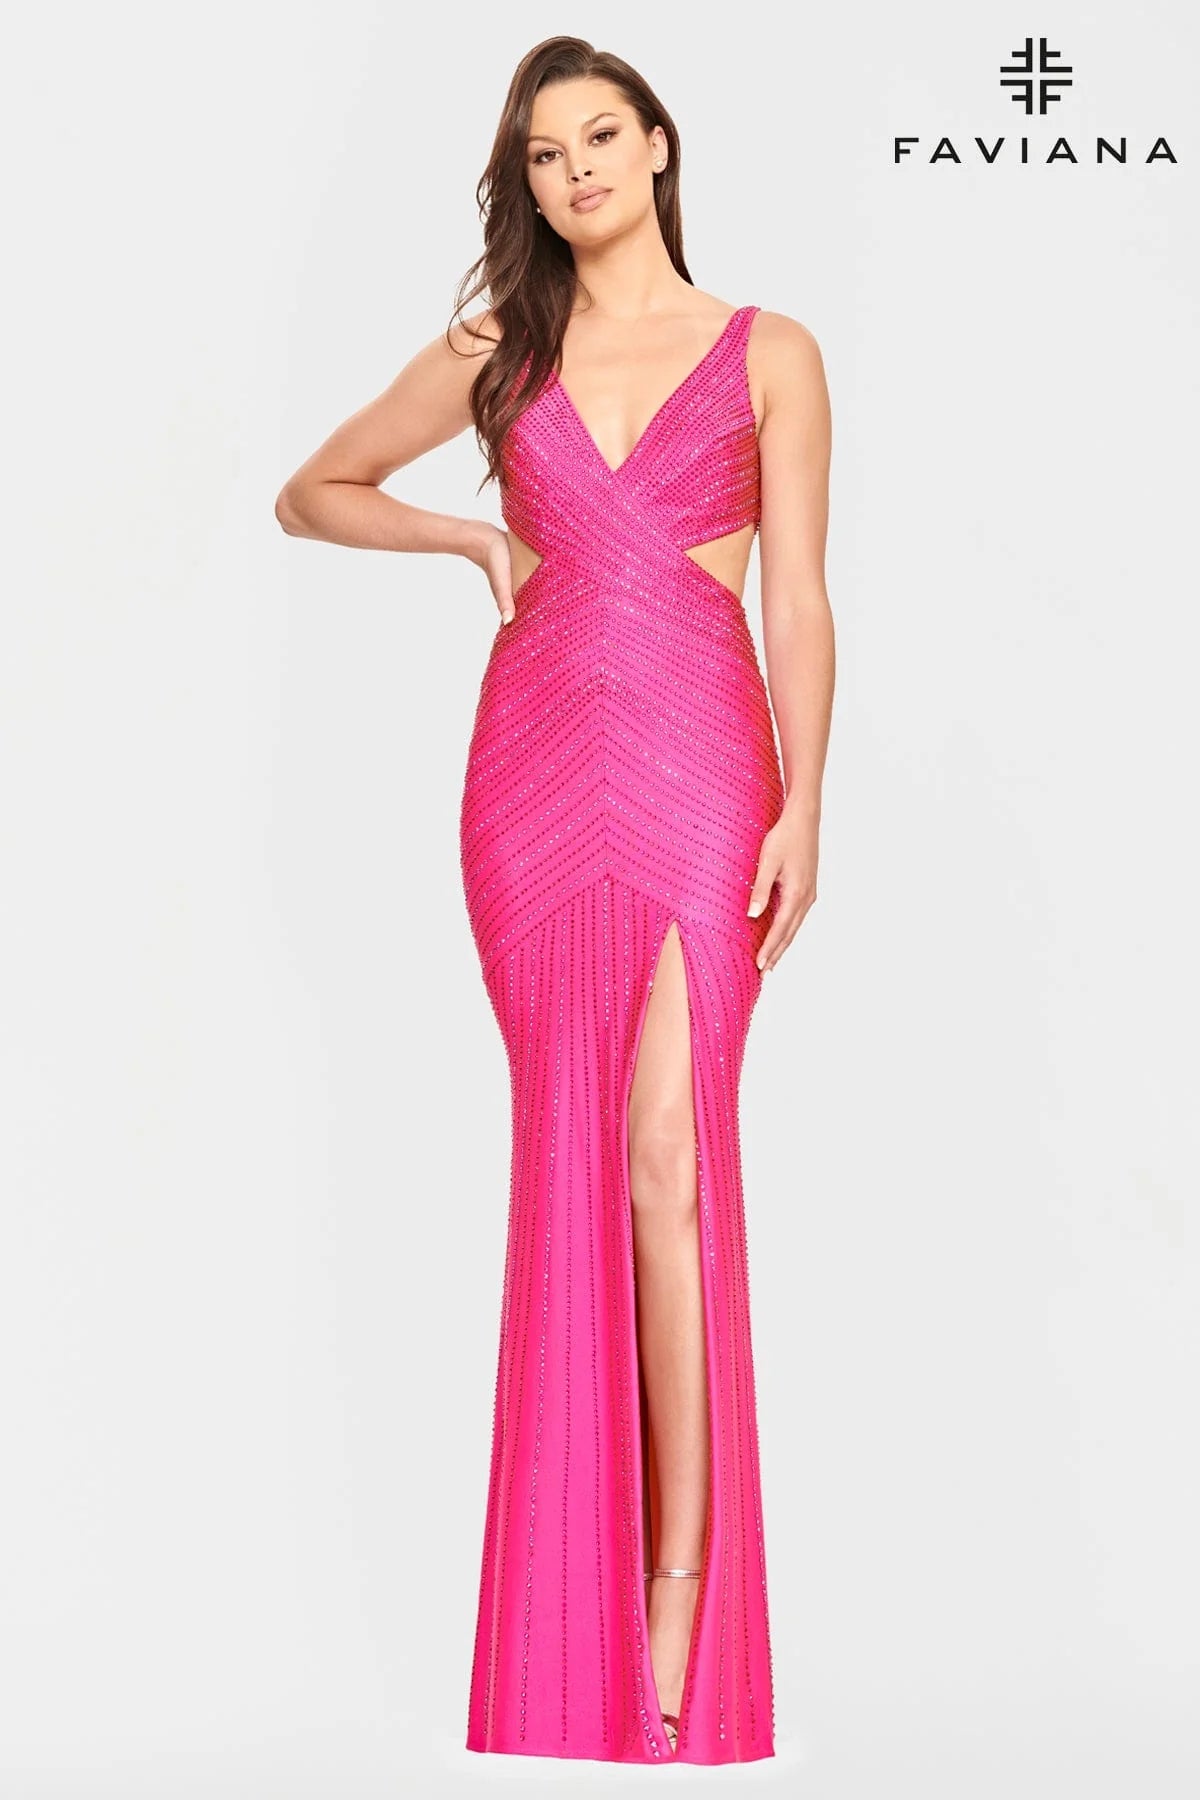 Hot Pink V Neck Prom Dress With Patterned Beading And Side Cutouts